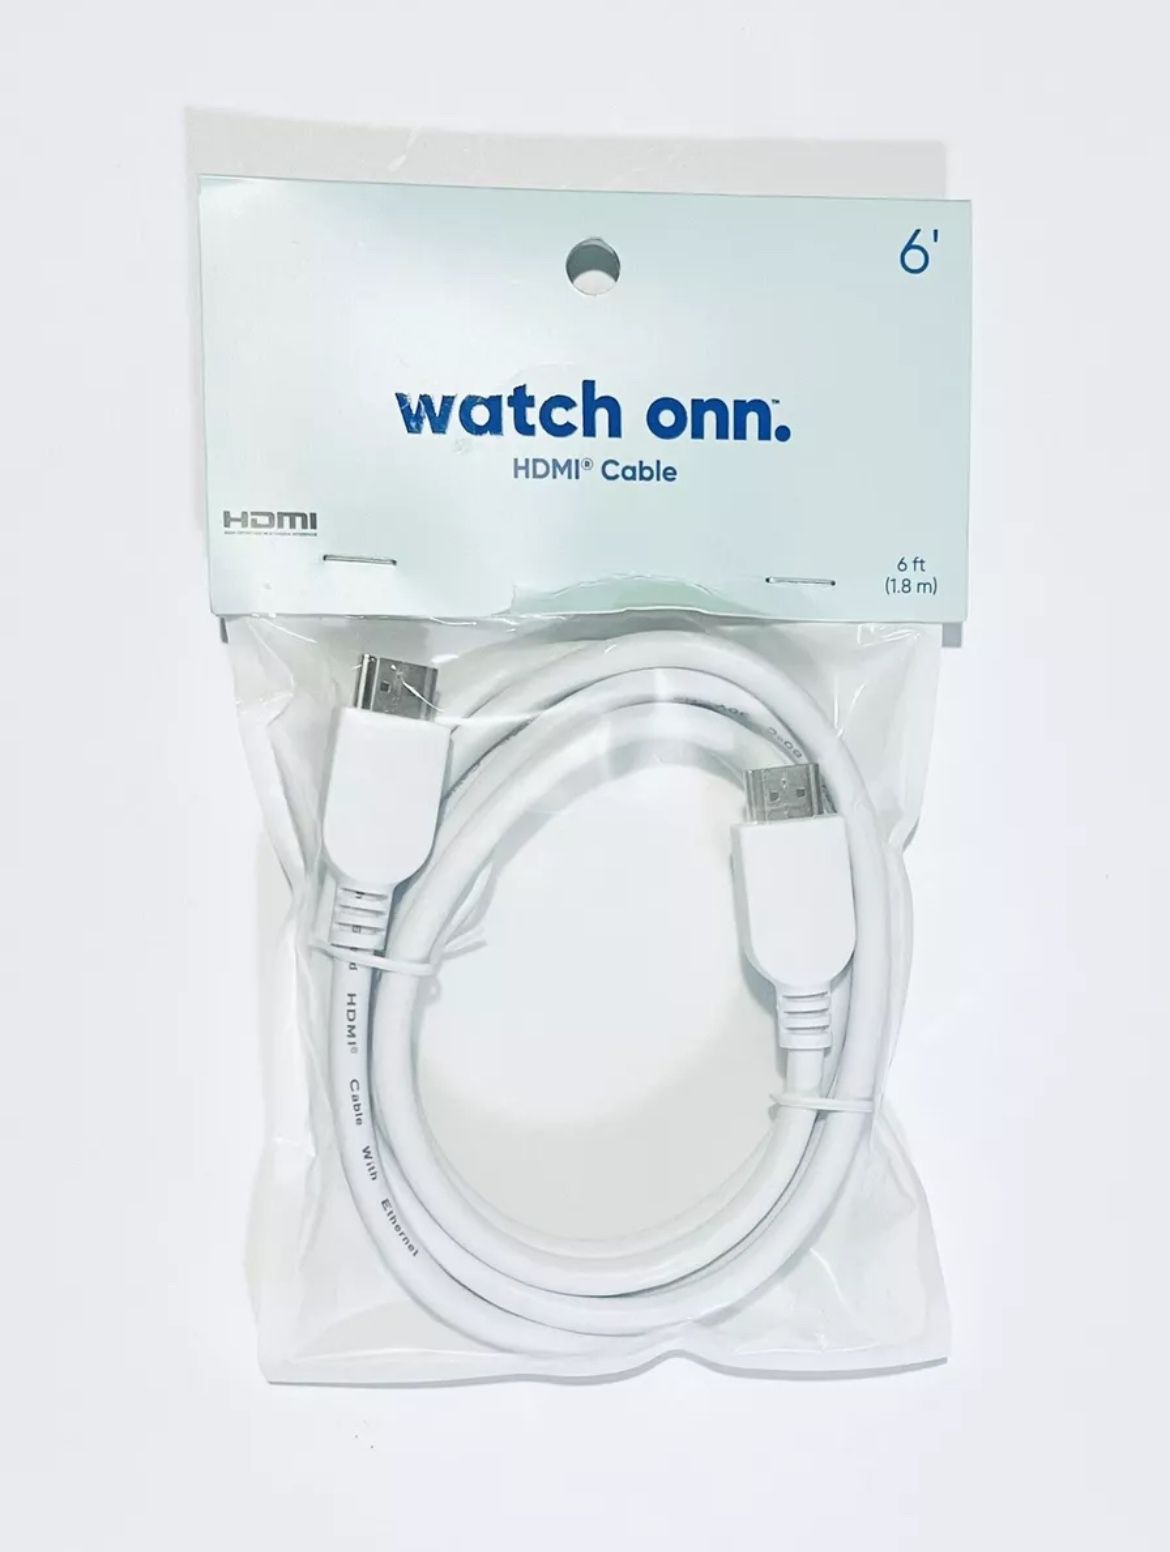 watch onn. 6’ HDMI Cable, BRAND NEW!!